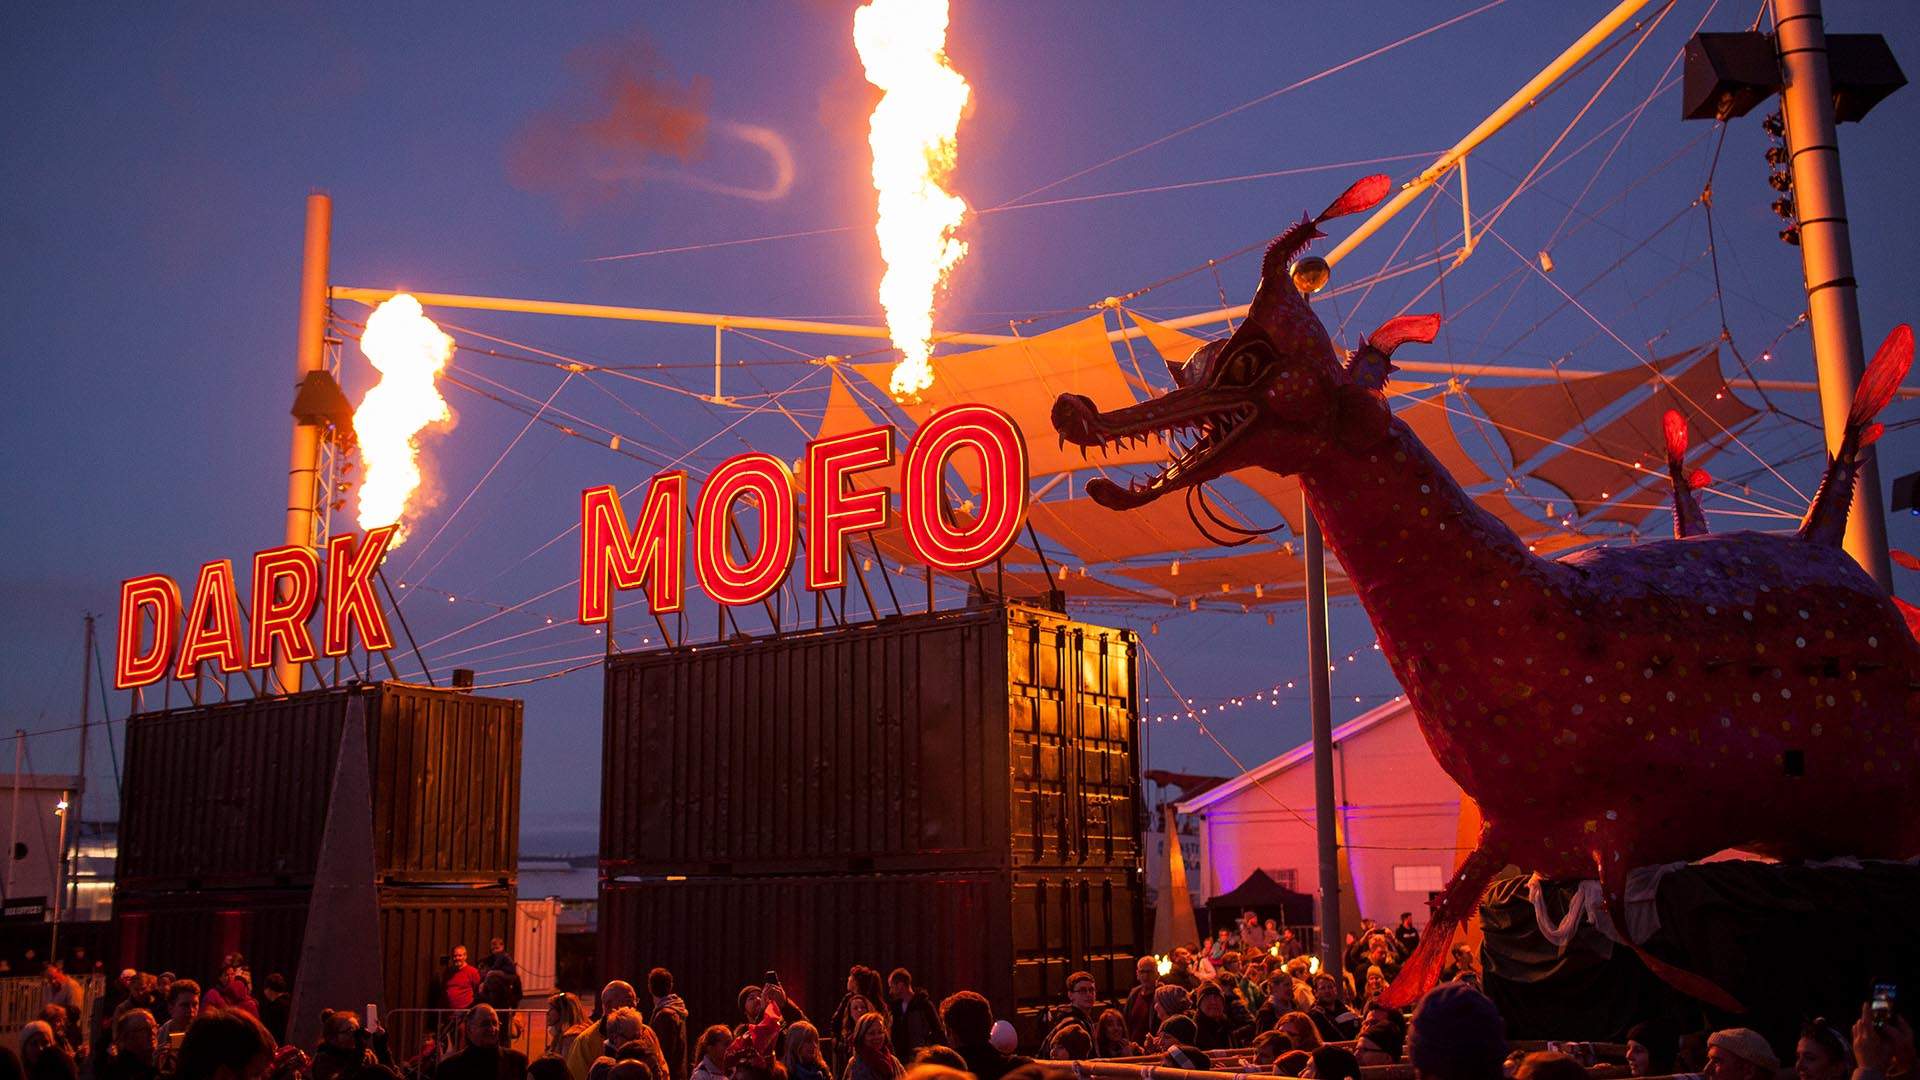 Dark Mofo Announces Boundary-Pushing 2019 Lineup with Ai Weiwei and Mike Parr